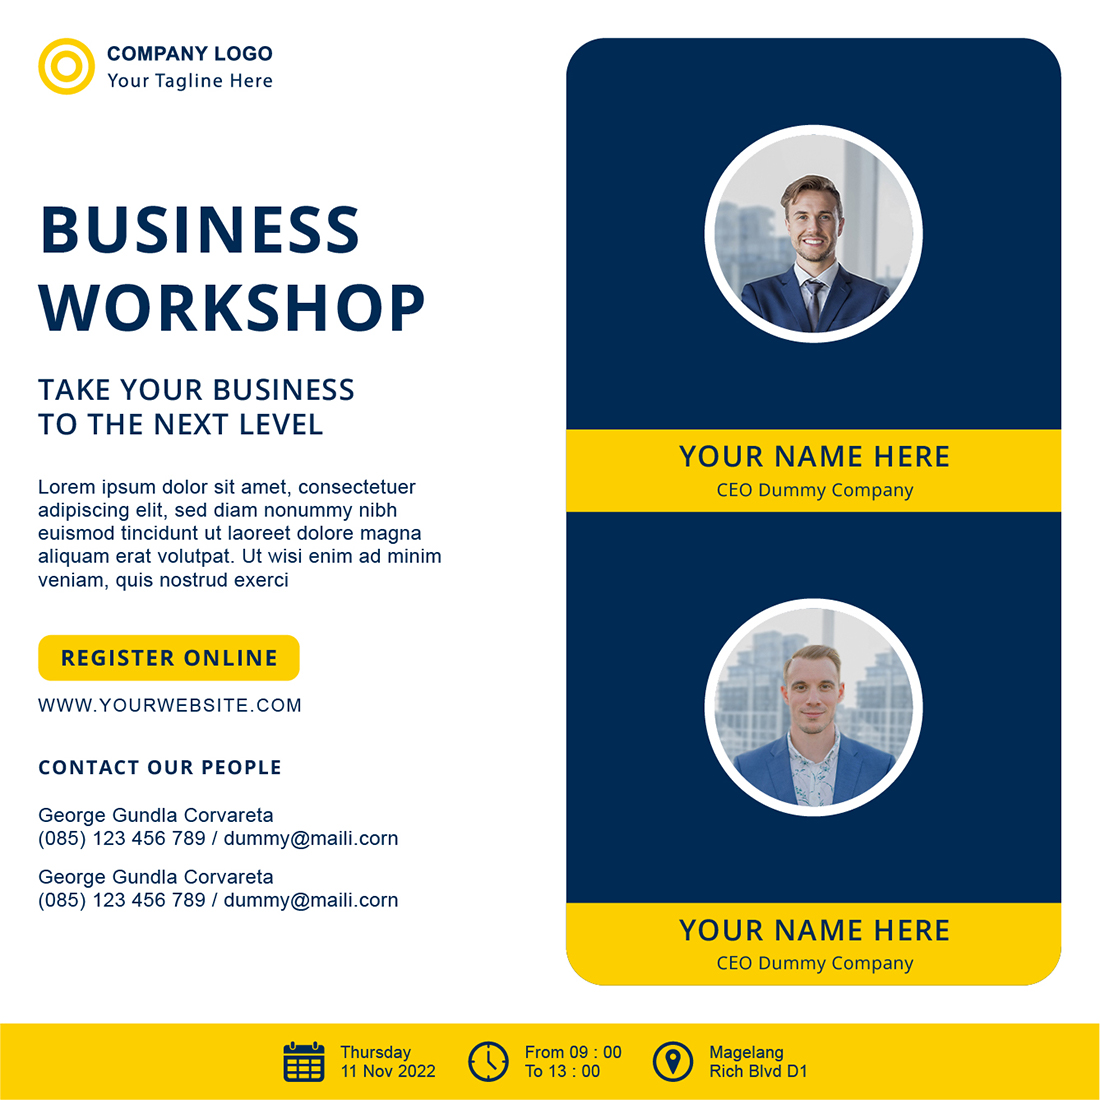 Great template for business workshop.